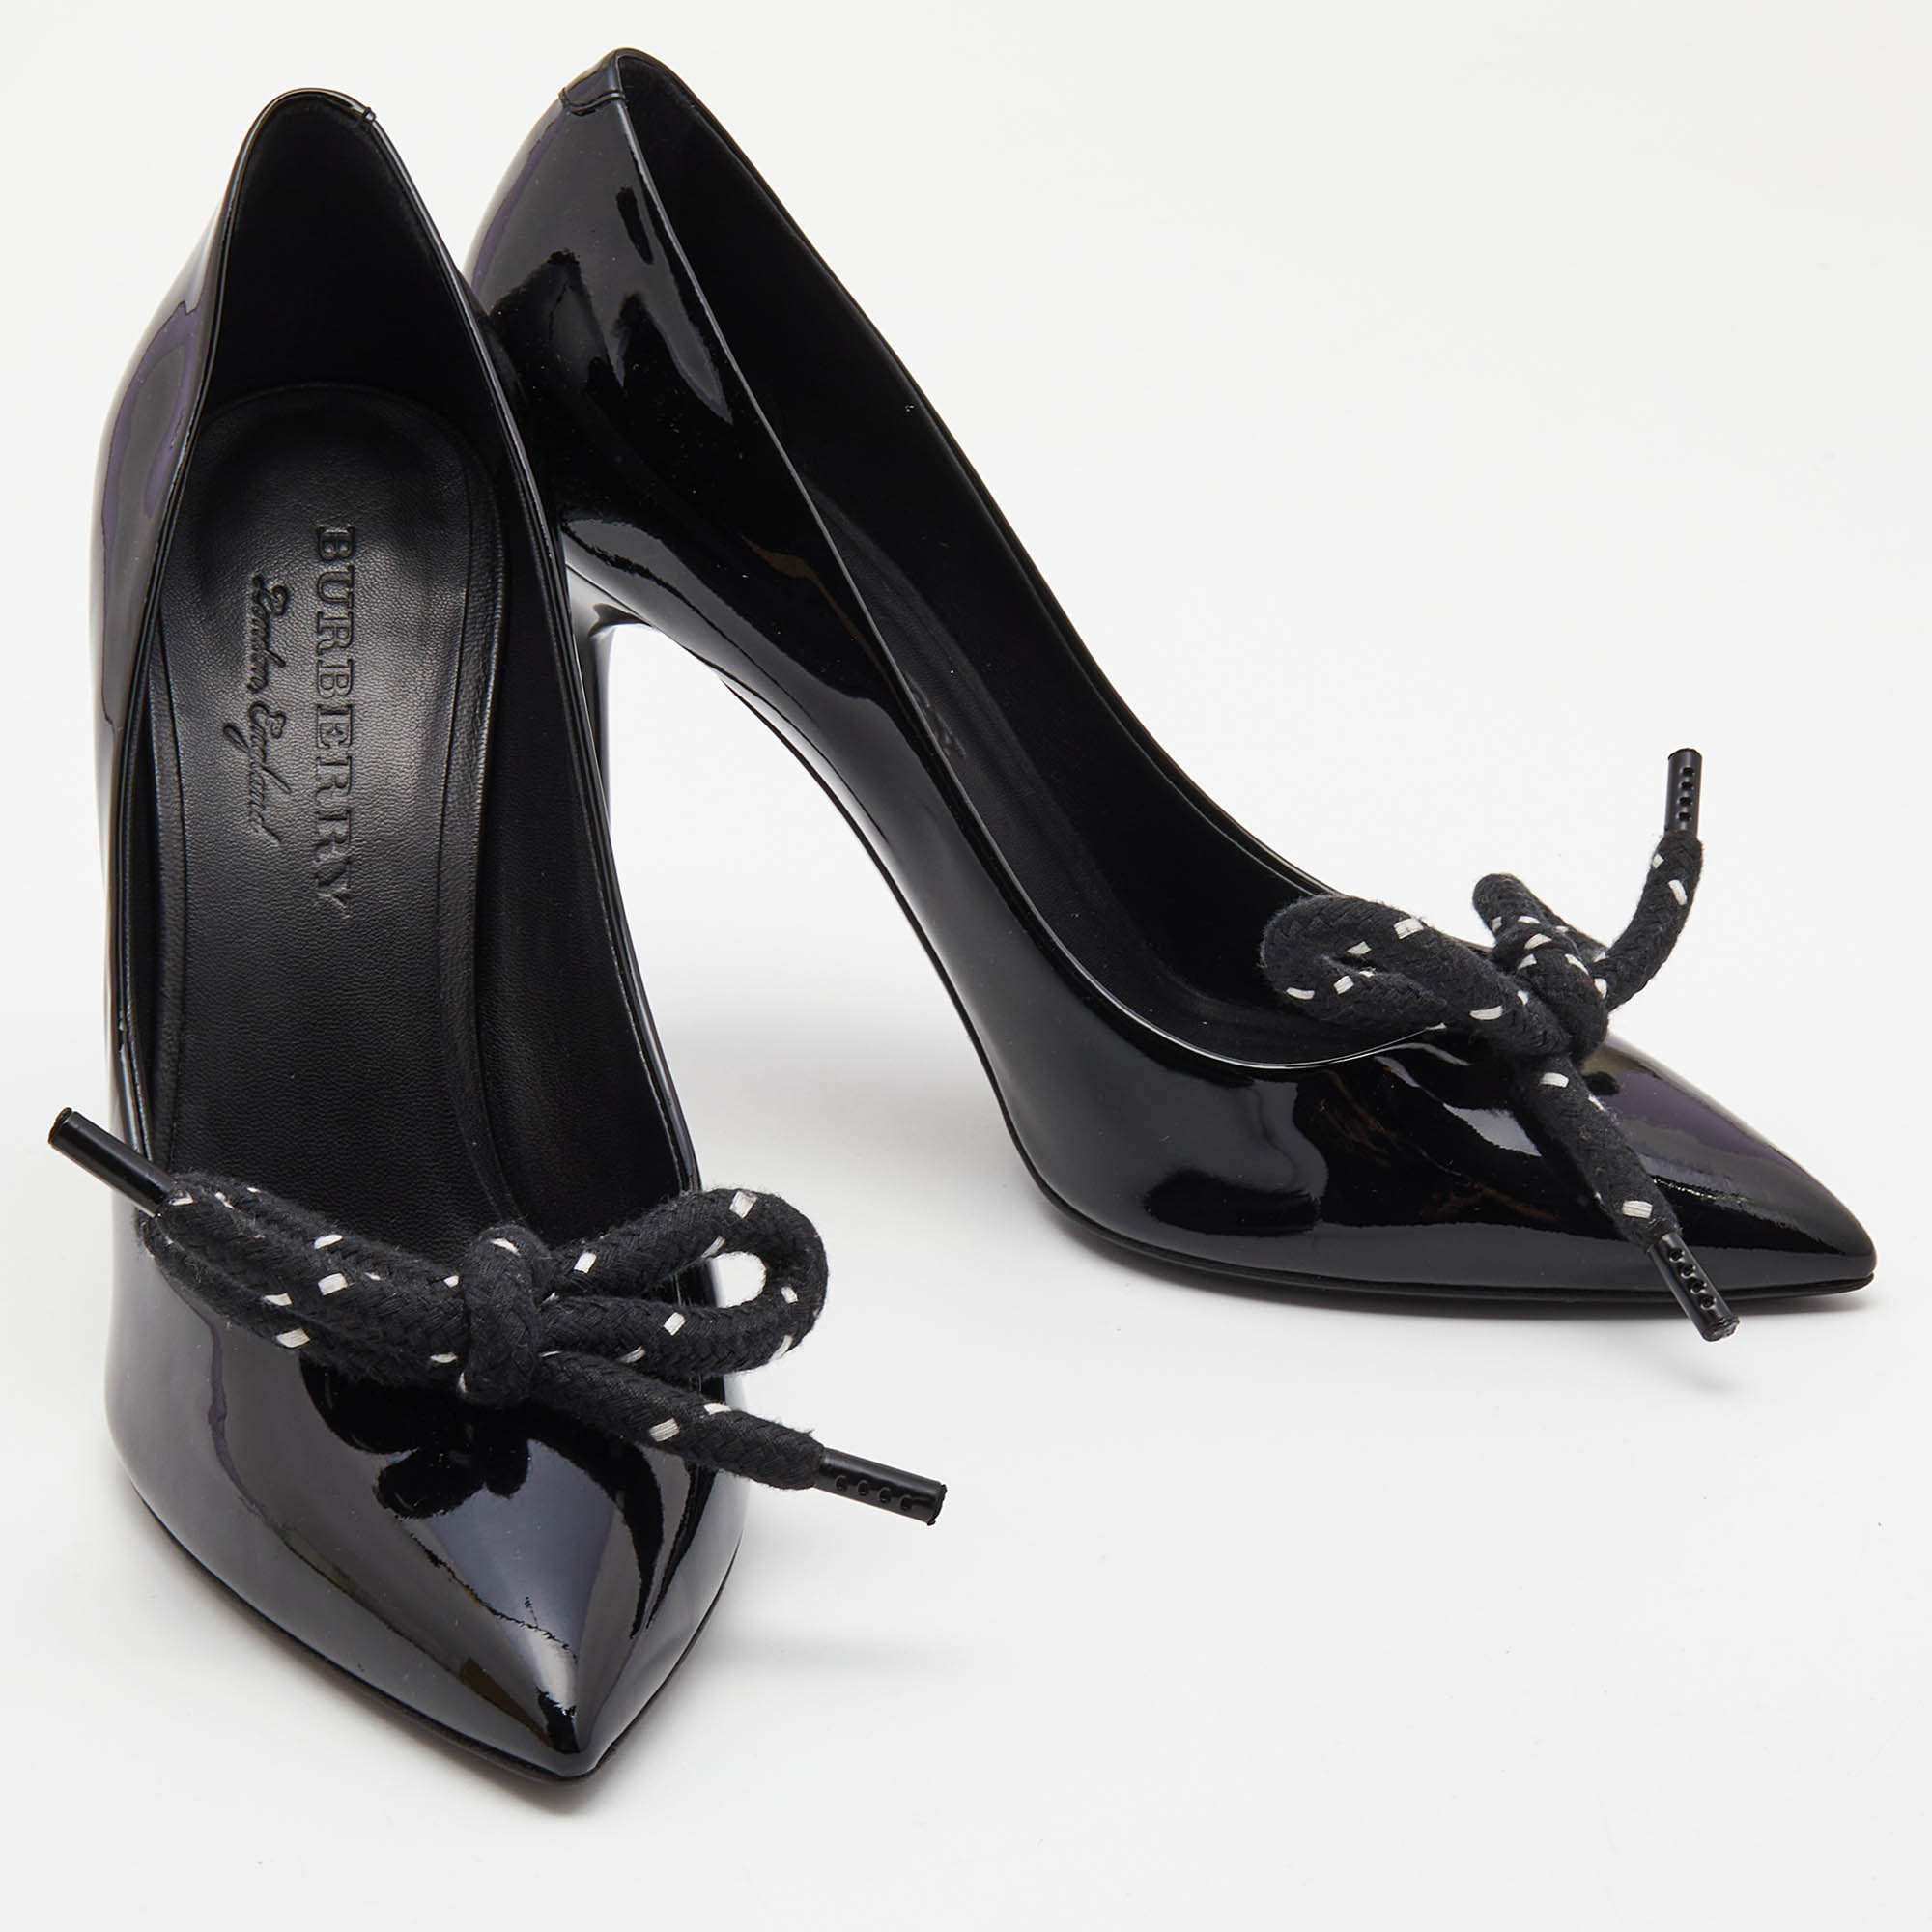 Burberry Black Patent Leather Finsbury Bow Pointed Toe Pumps Size 40